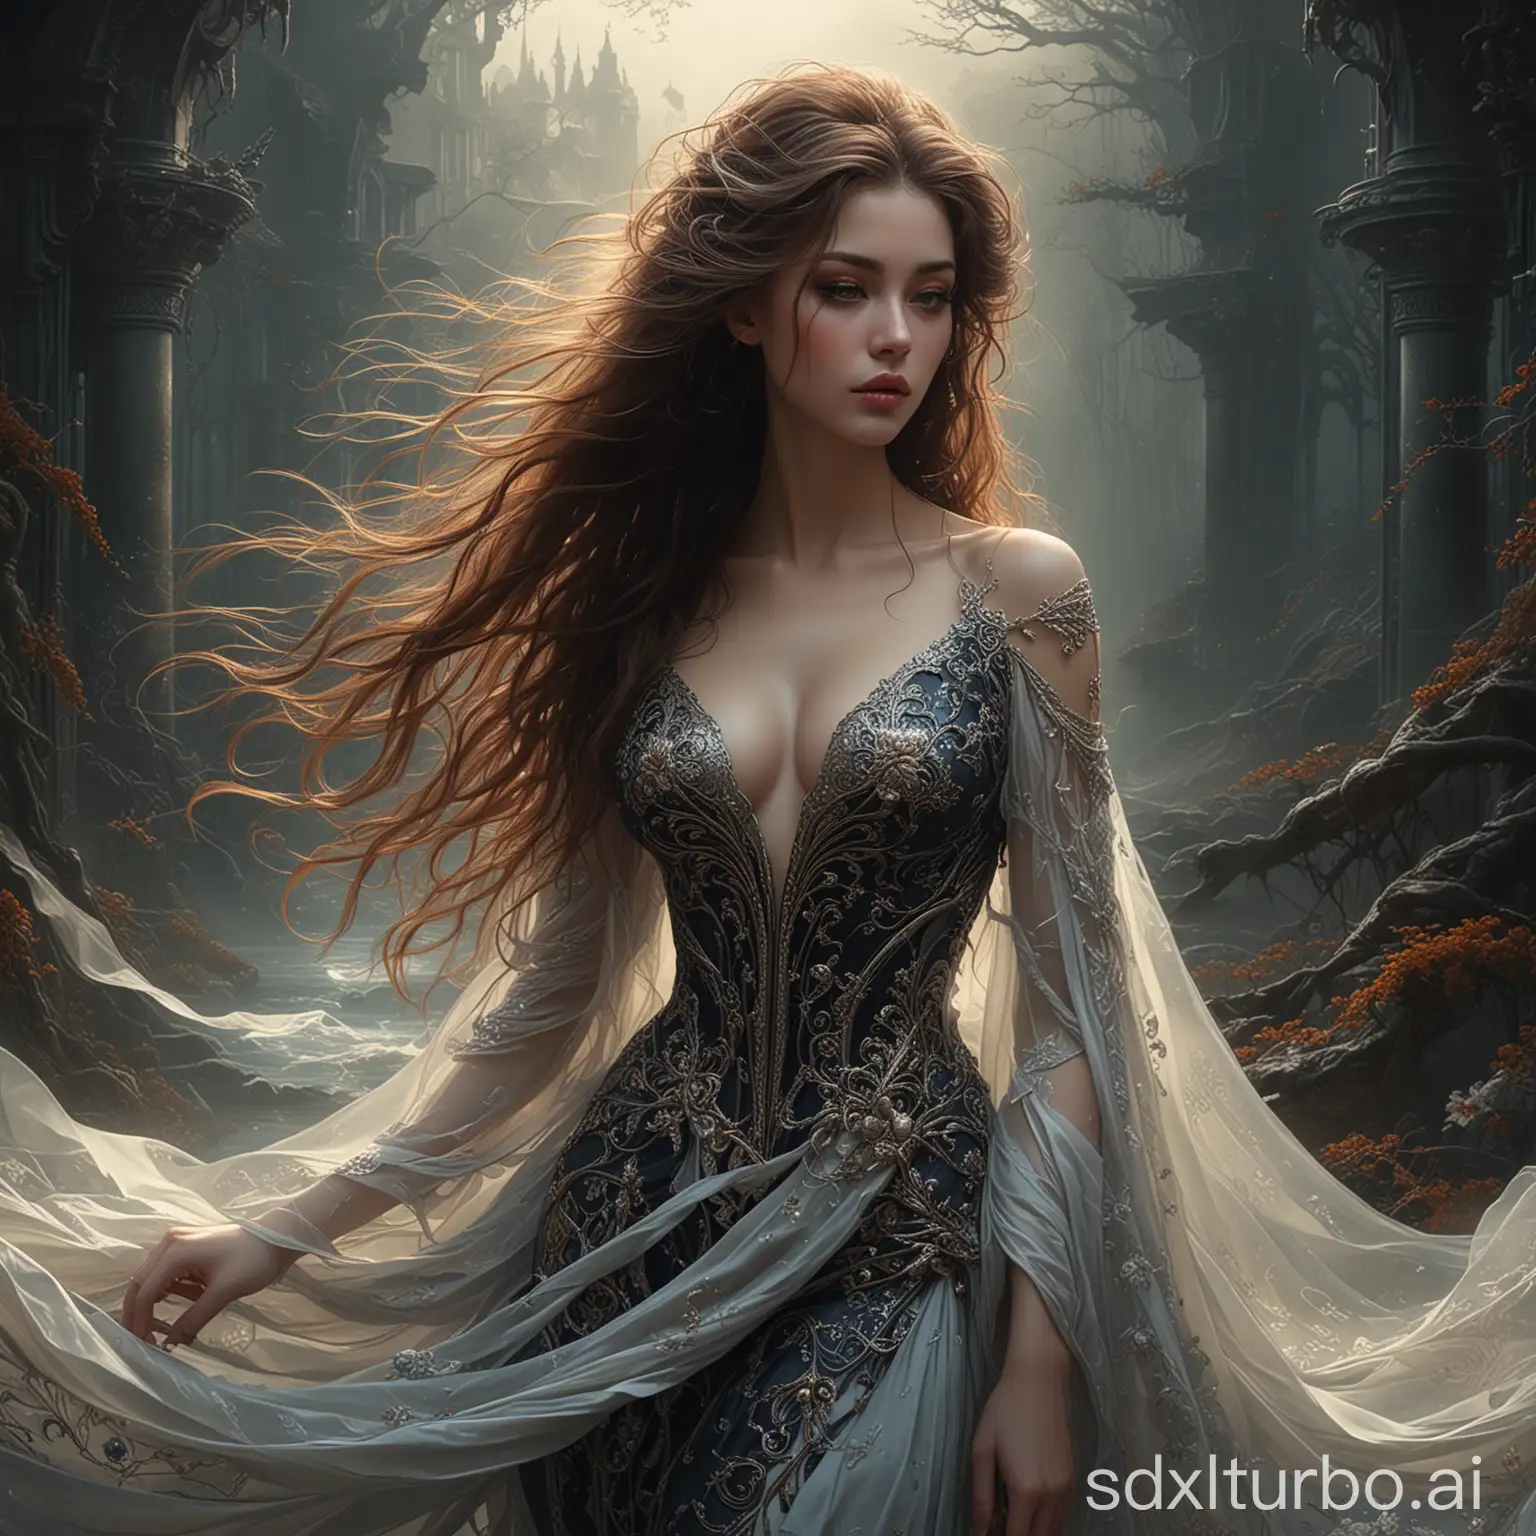 a stunning and sensual digital painting inspired by the artistic style of Karol Bak. The female subject is depicted with long, flowing hair and an exquisite gown, her eyes locked in a mysterious gaze. The background features a dark, fantastical landscape with intricate details and a glossy finish. The artwork showcases the collaboration of Karol Bak and Peter Mohrbacher, Amano, and Karol Bak, and is a perfect embodiment of their combined talents. The piece captures the essence of dark fantasy, conceptual art, and illustration, creating a beautiful and mesmerizing digital masterpiece.